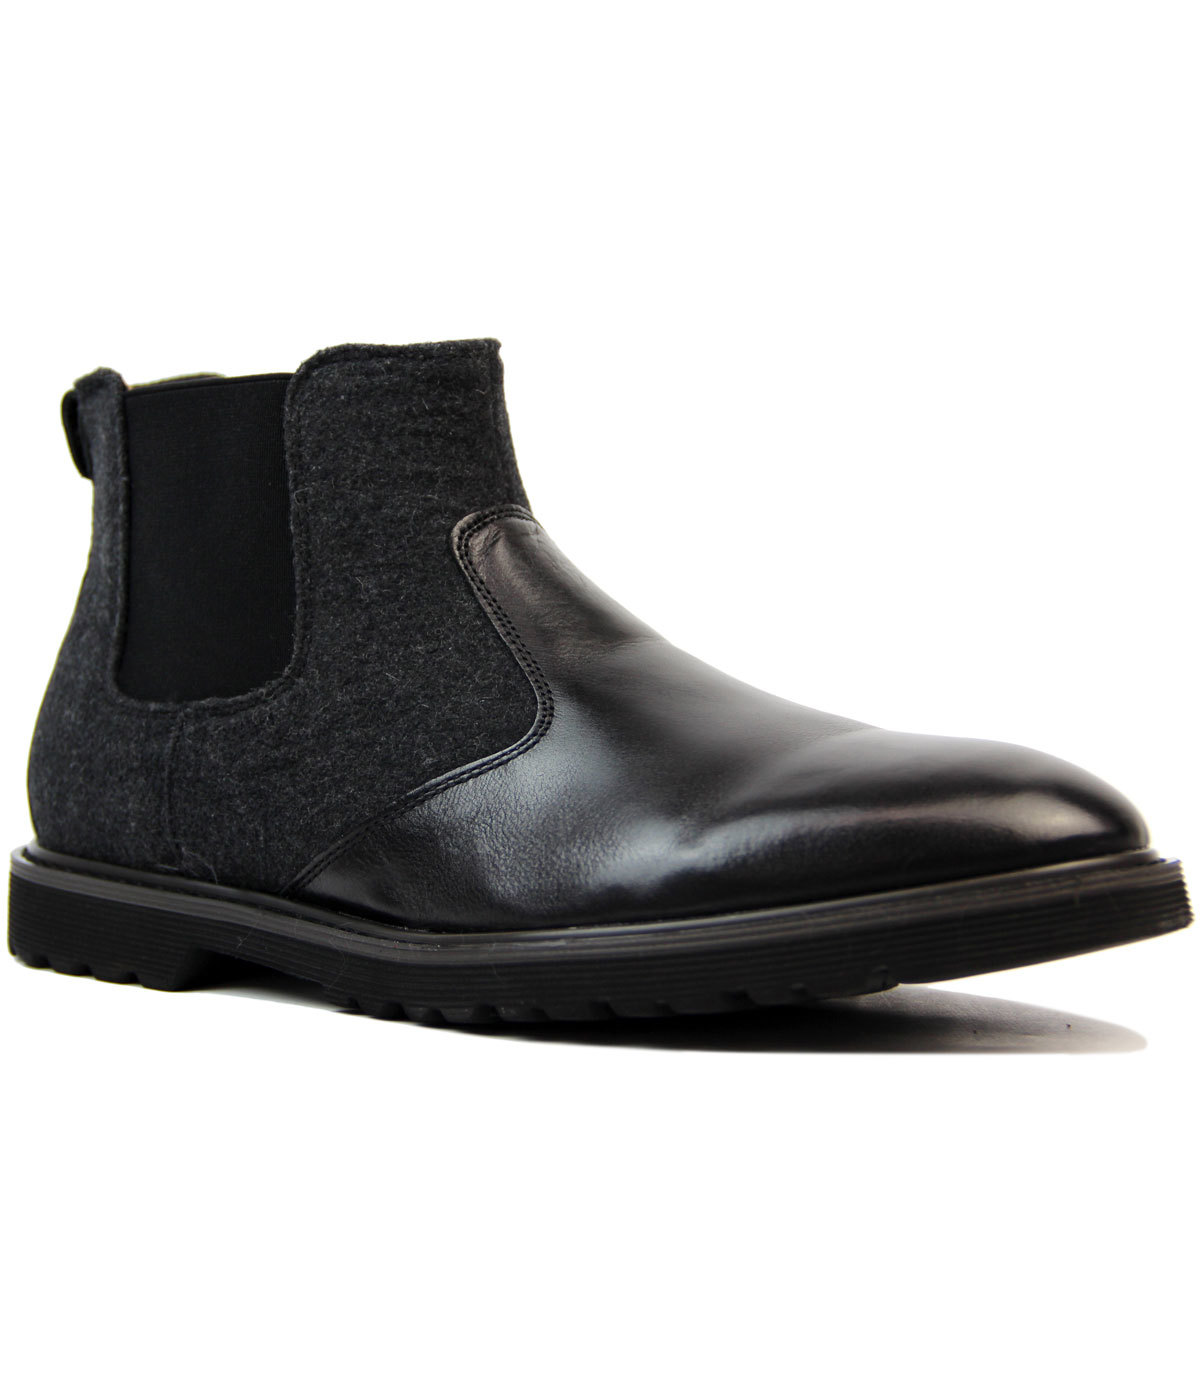 PETER WERTH Laurie Retro Mod Leather & Melton Chelsea Boots